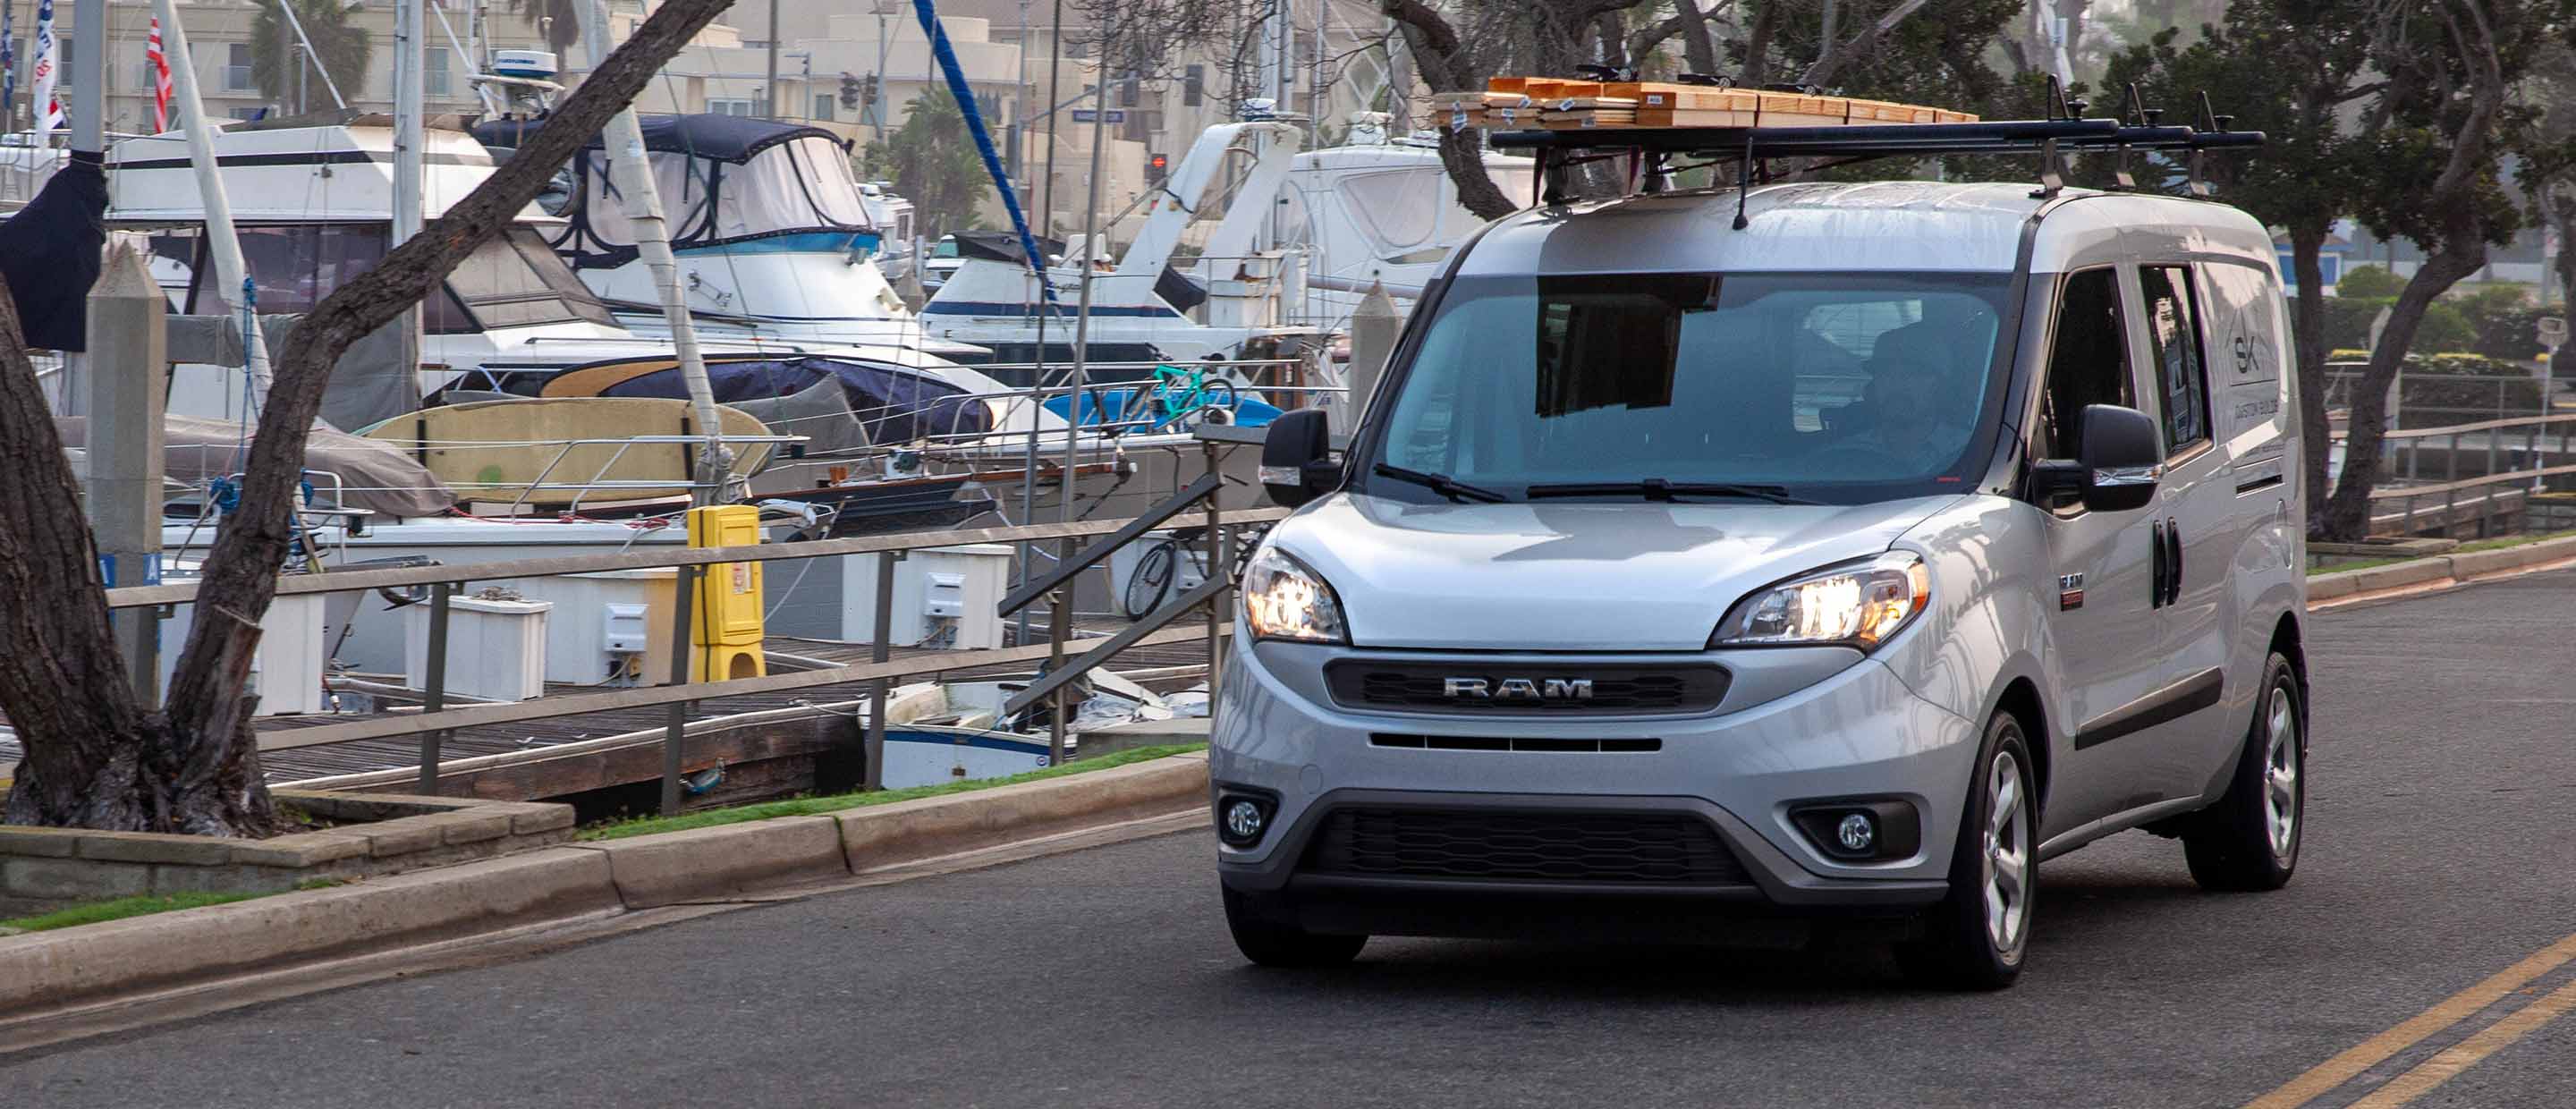 A 2022 Ram ProMaster City, carrying planks of lumber on its roof rack as it's driven past a marina.